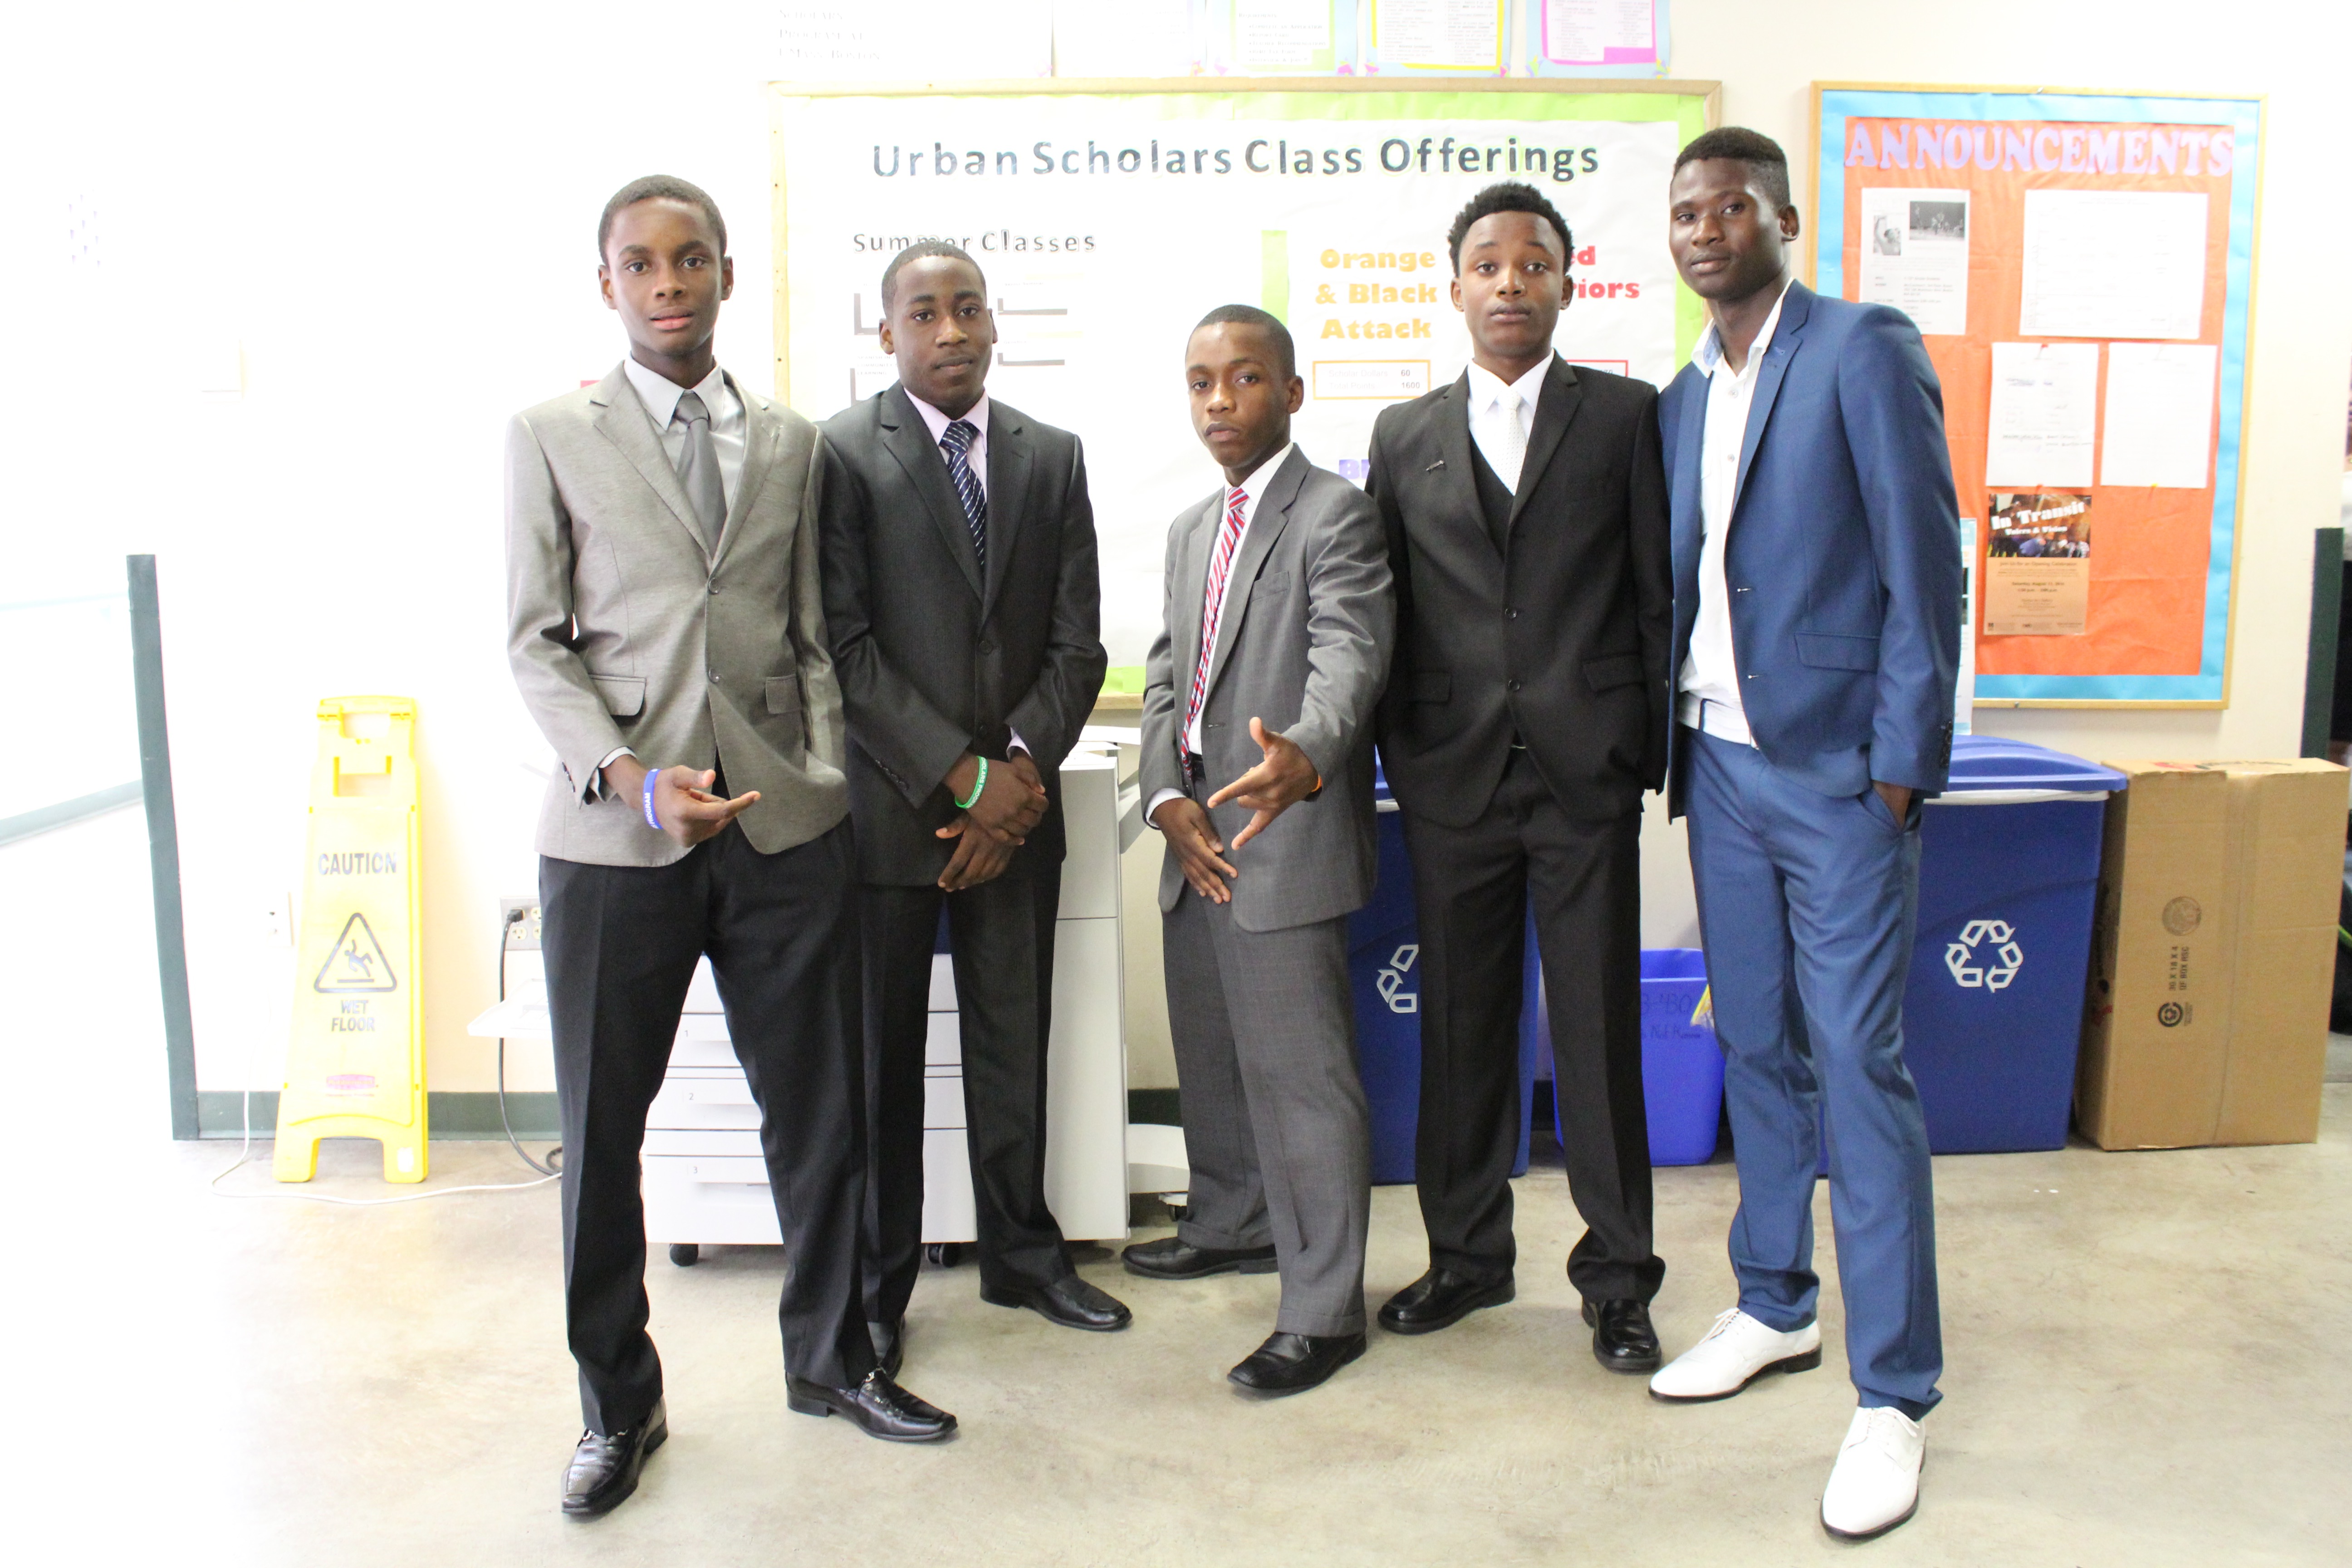 These boys posed for the camera looking very spiffy!